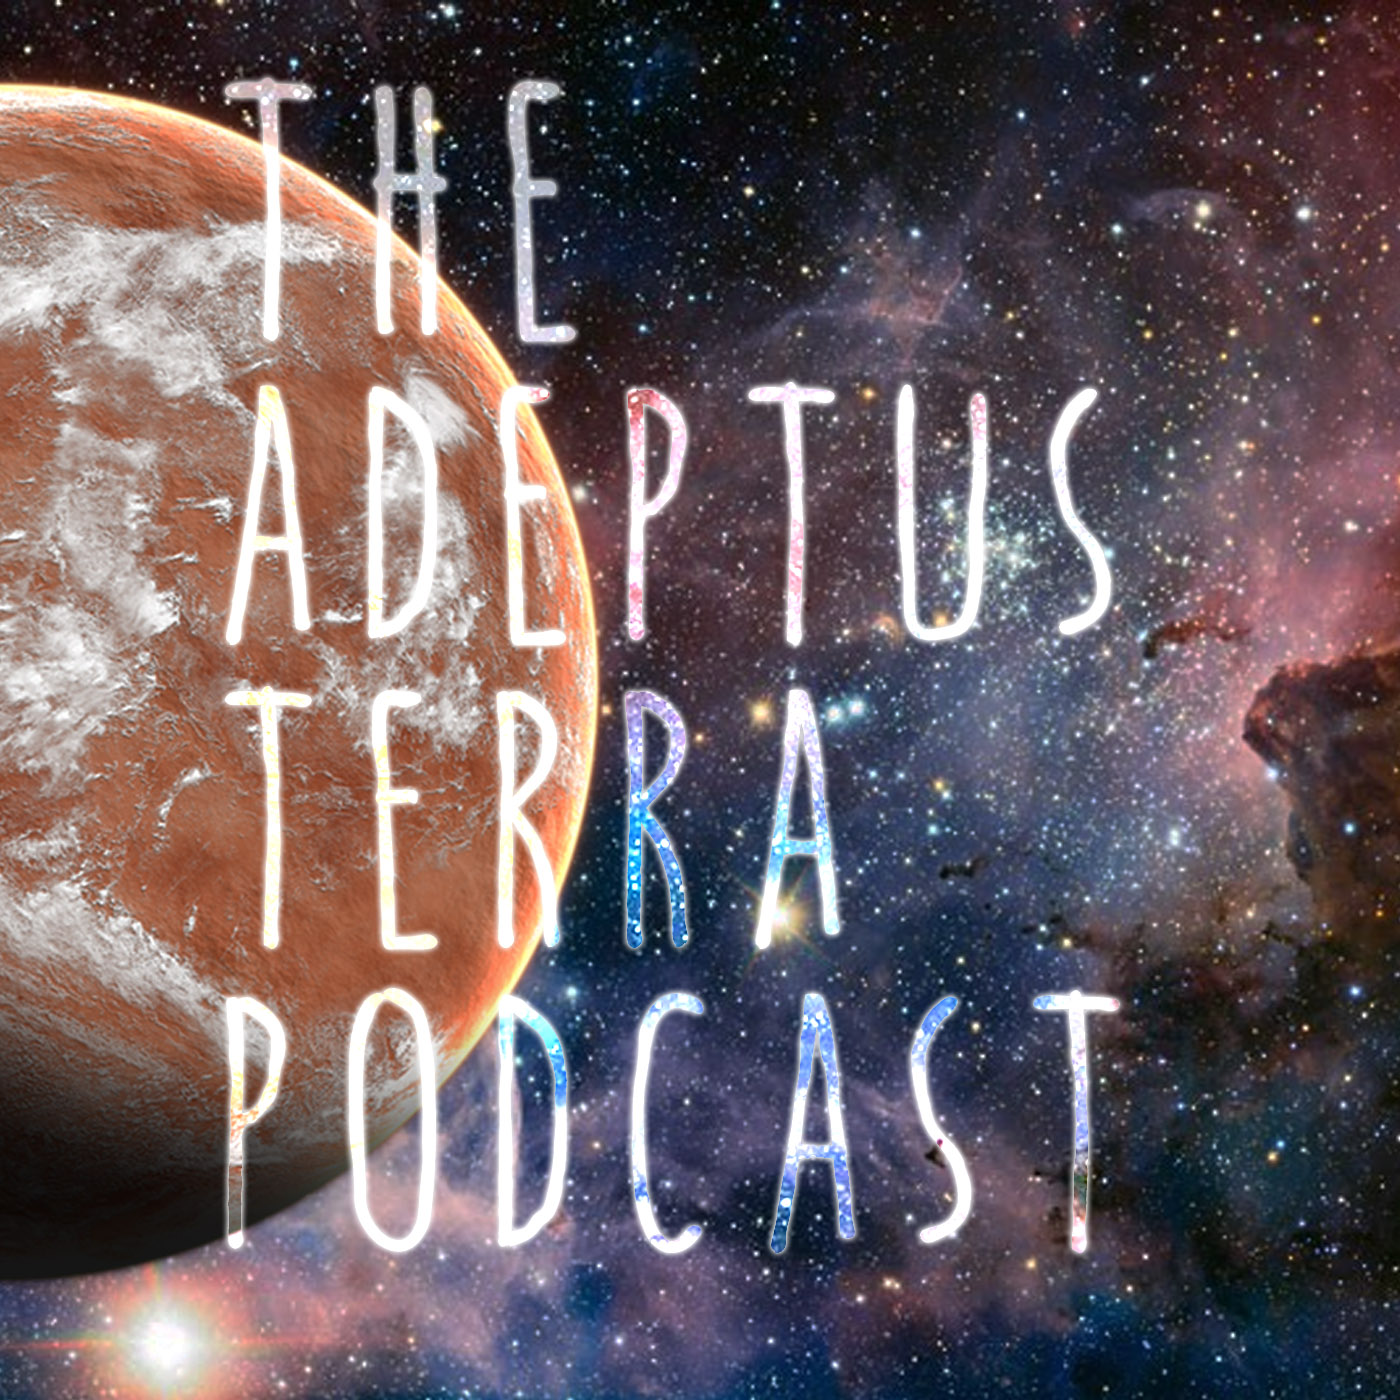 The Adeptus Terra Podcast Episode 7 'Back with a vengeance'